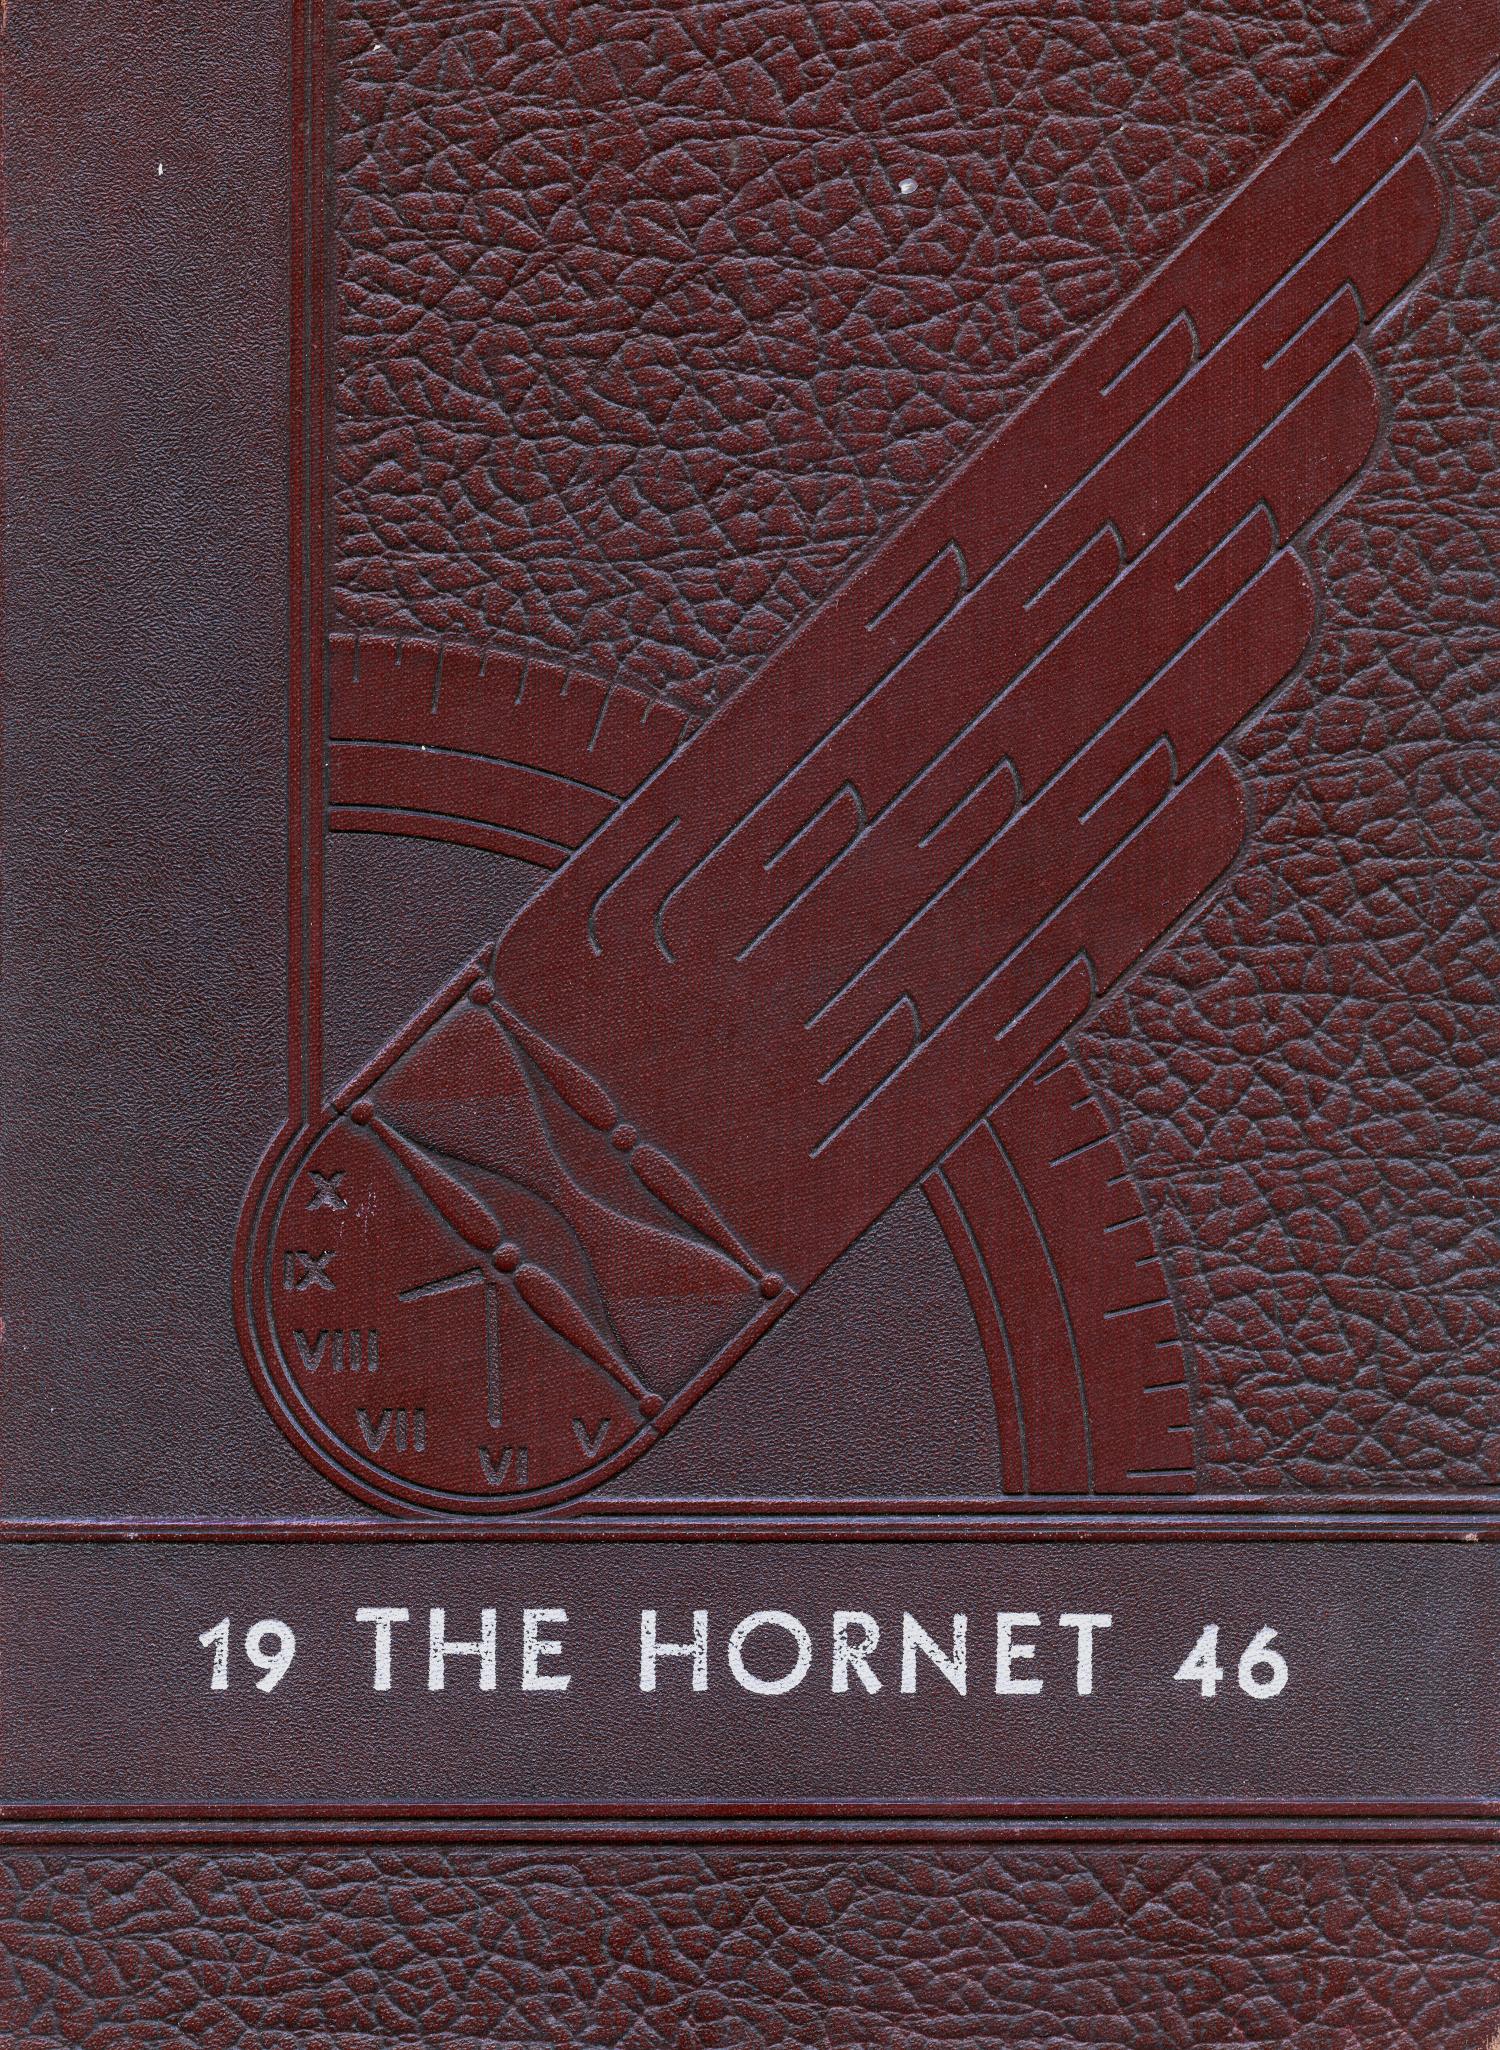 The Hornet, Yearbook of Aspermont Students, 1946
                                                
                                                    Front Cover
                                                